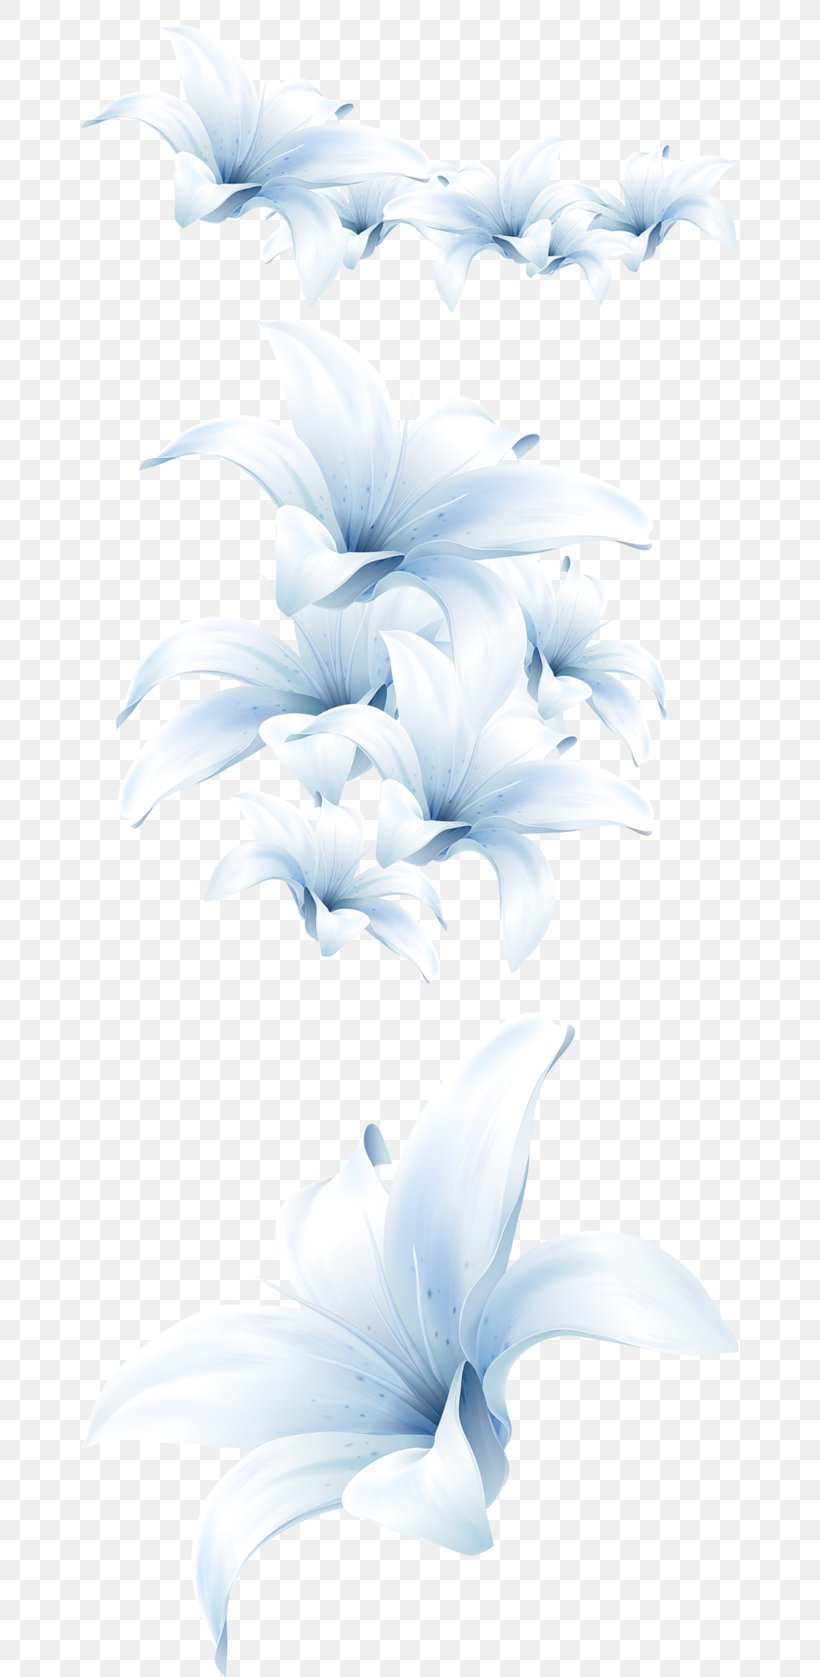 Flower Madonna Lily Petal Image, PNG, 658x1677px, Flower, Blue, Botany, Feather, Lily Download Free